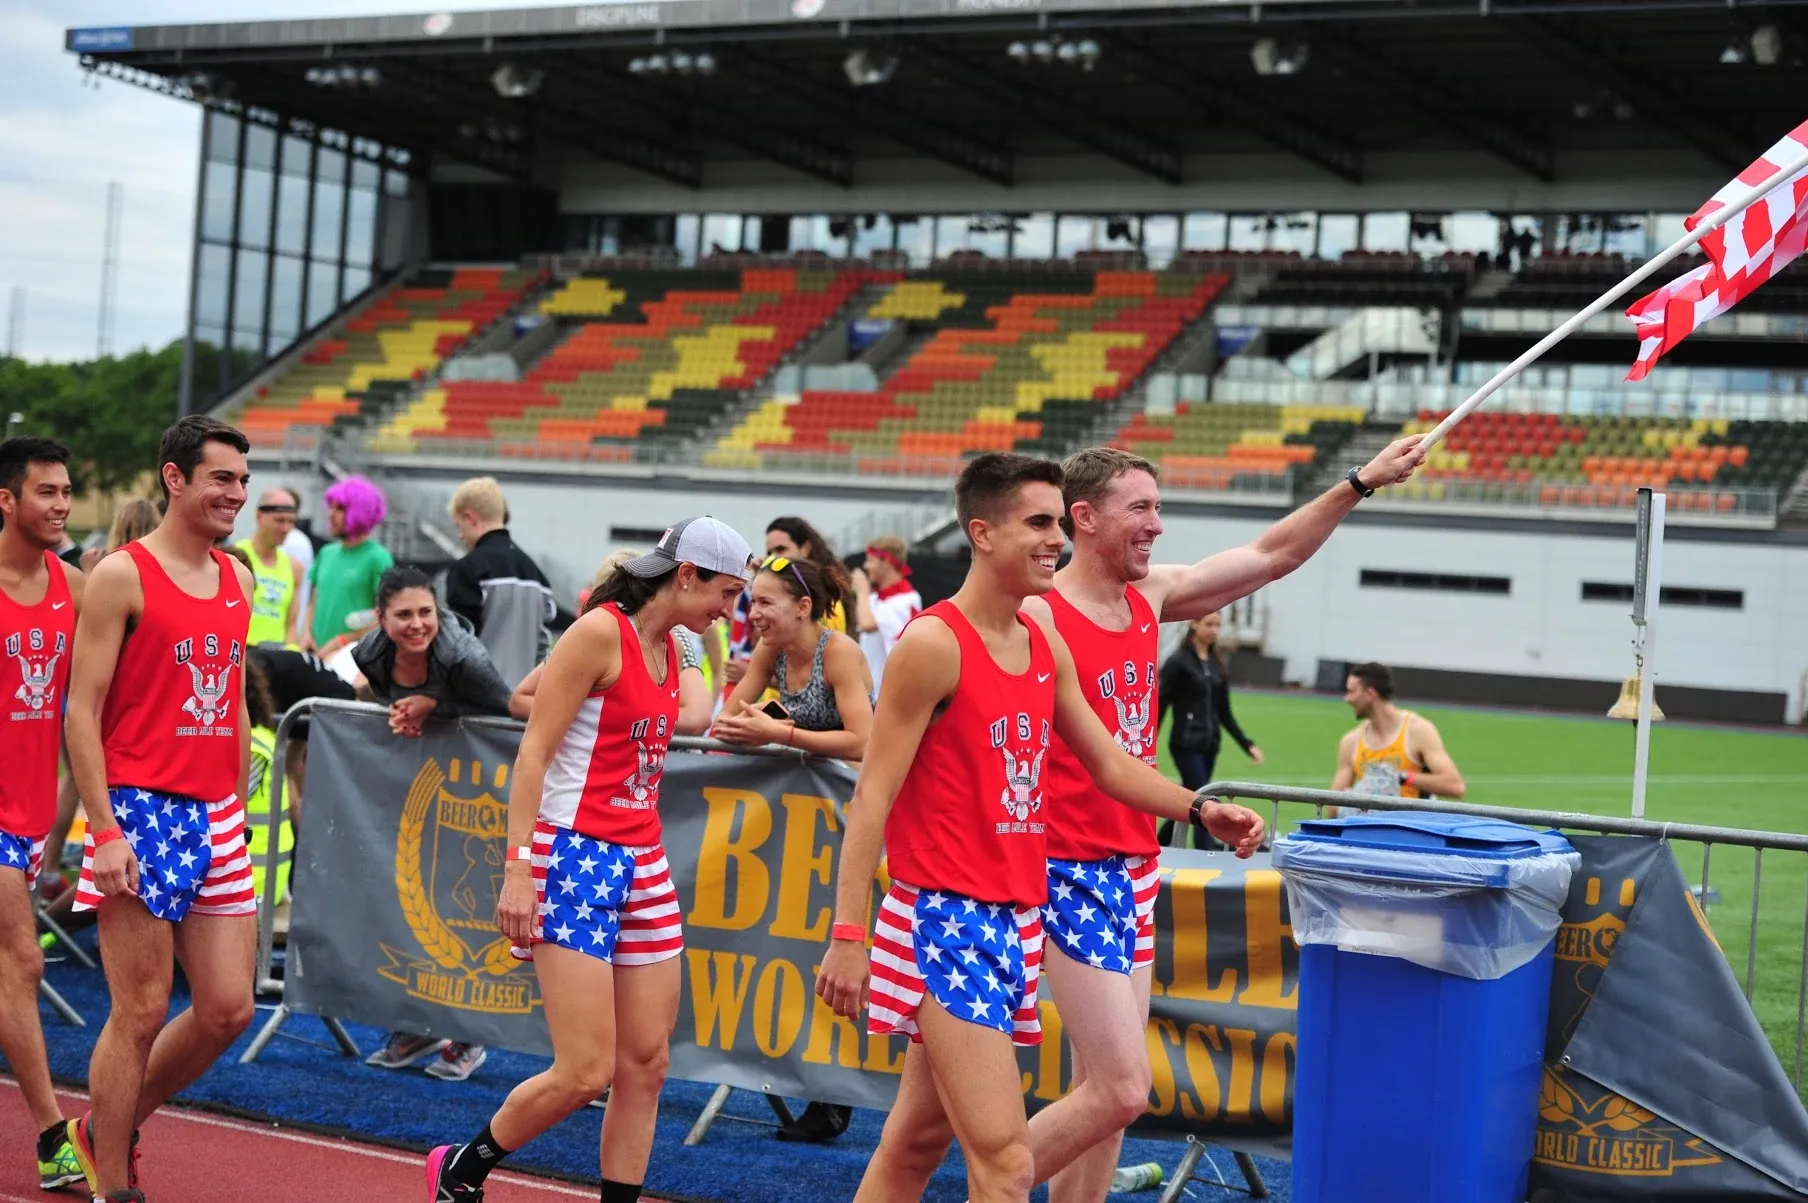 Team USA at the 2017 Beer Mile World Classic in London